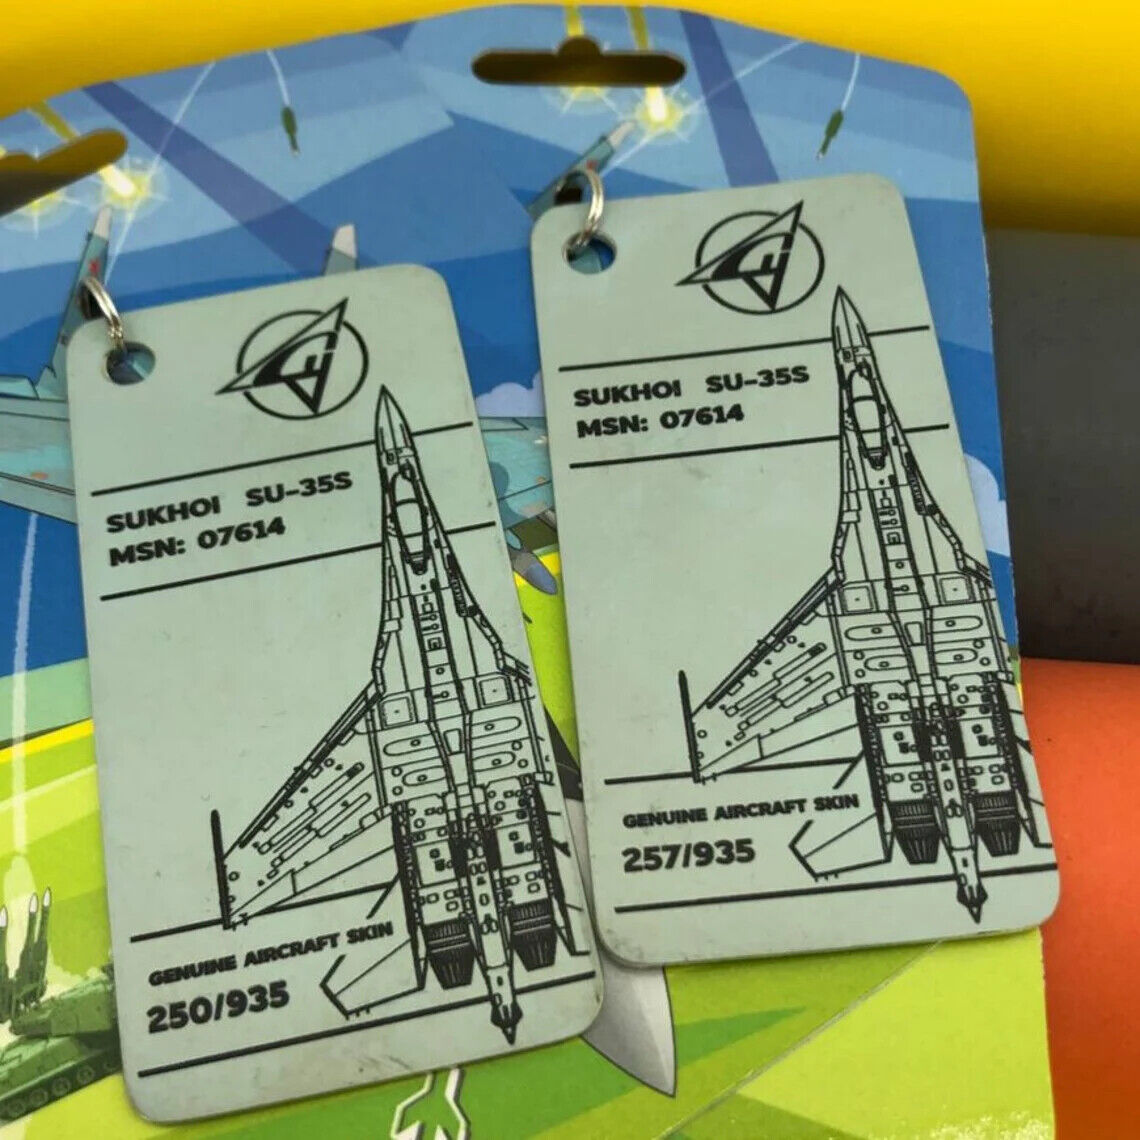 Keychain from downed russian SU-35S, MSN: 07614, Keychain with airplane